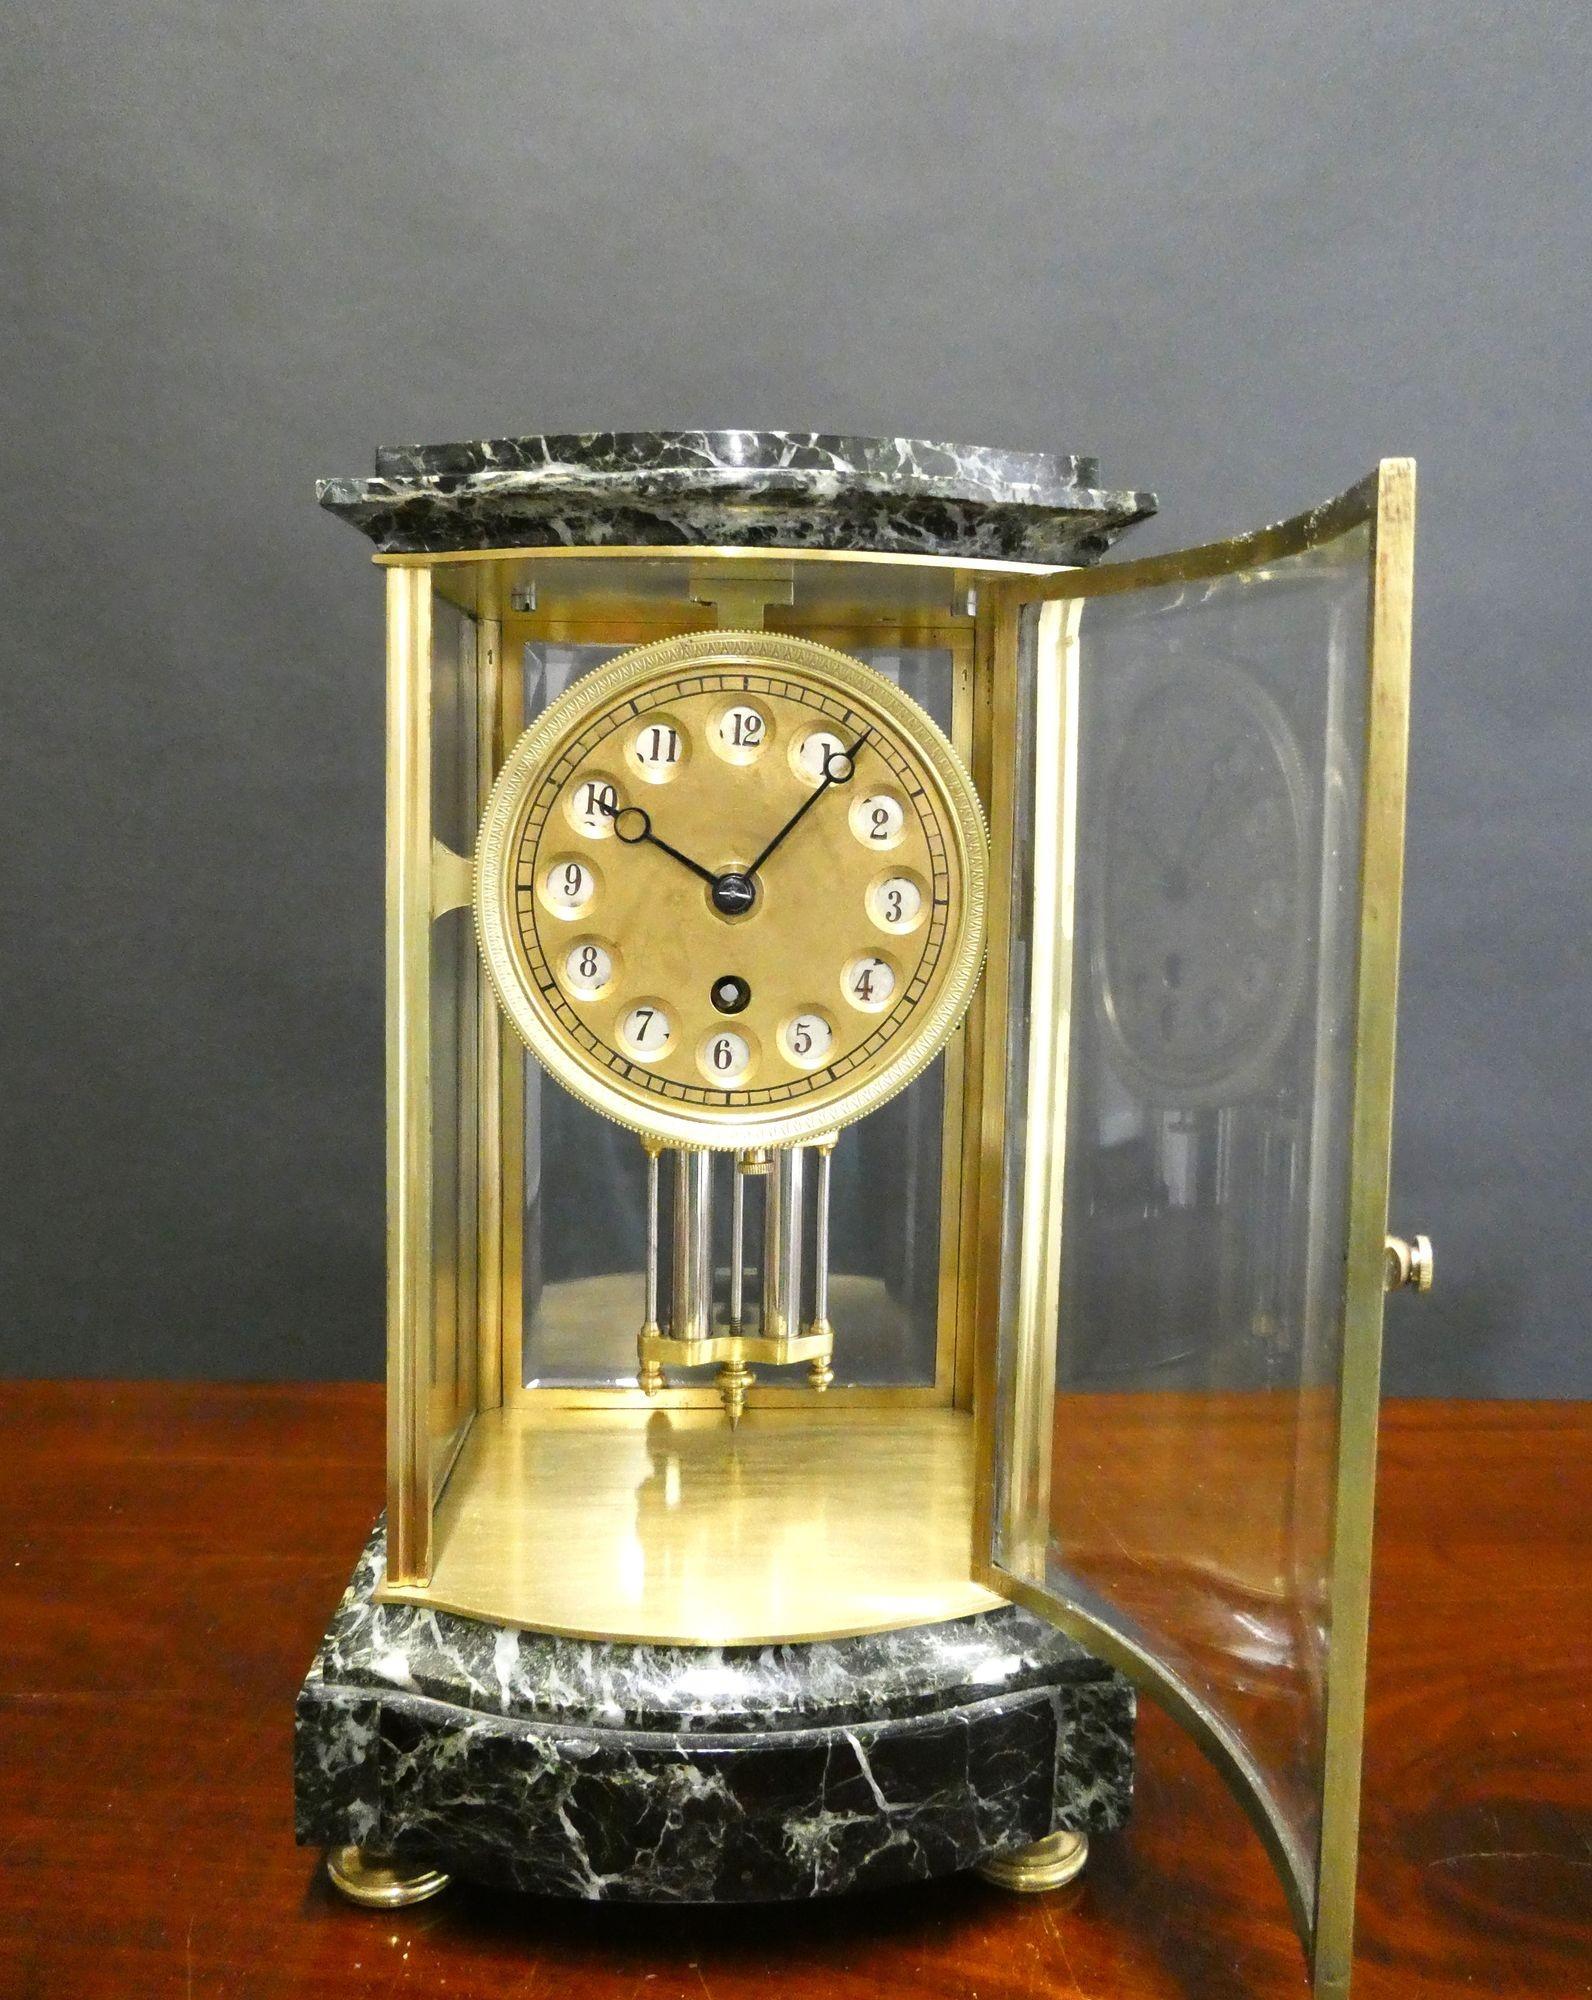 Unusual French 24 Hour Four Glass Mantel Clock

French four glass clock housed in a bow fronted brass case with beautifully figured marble top and base standing on decorative brass bun feet with bow fronted front glass.
Gilded and chased bezel,